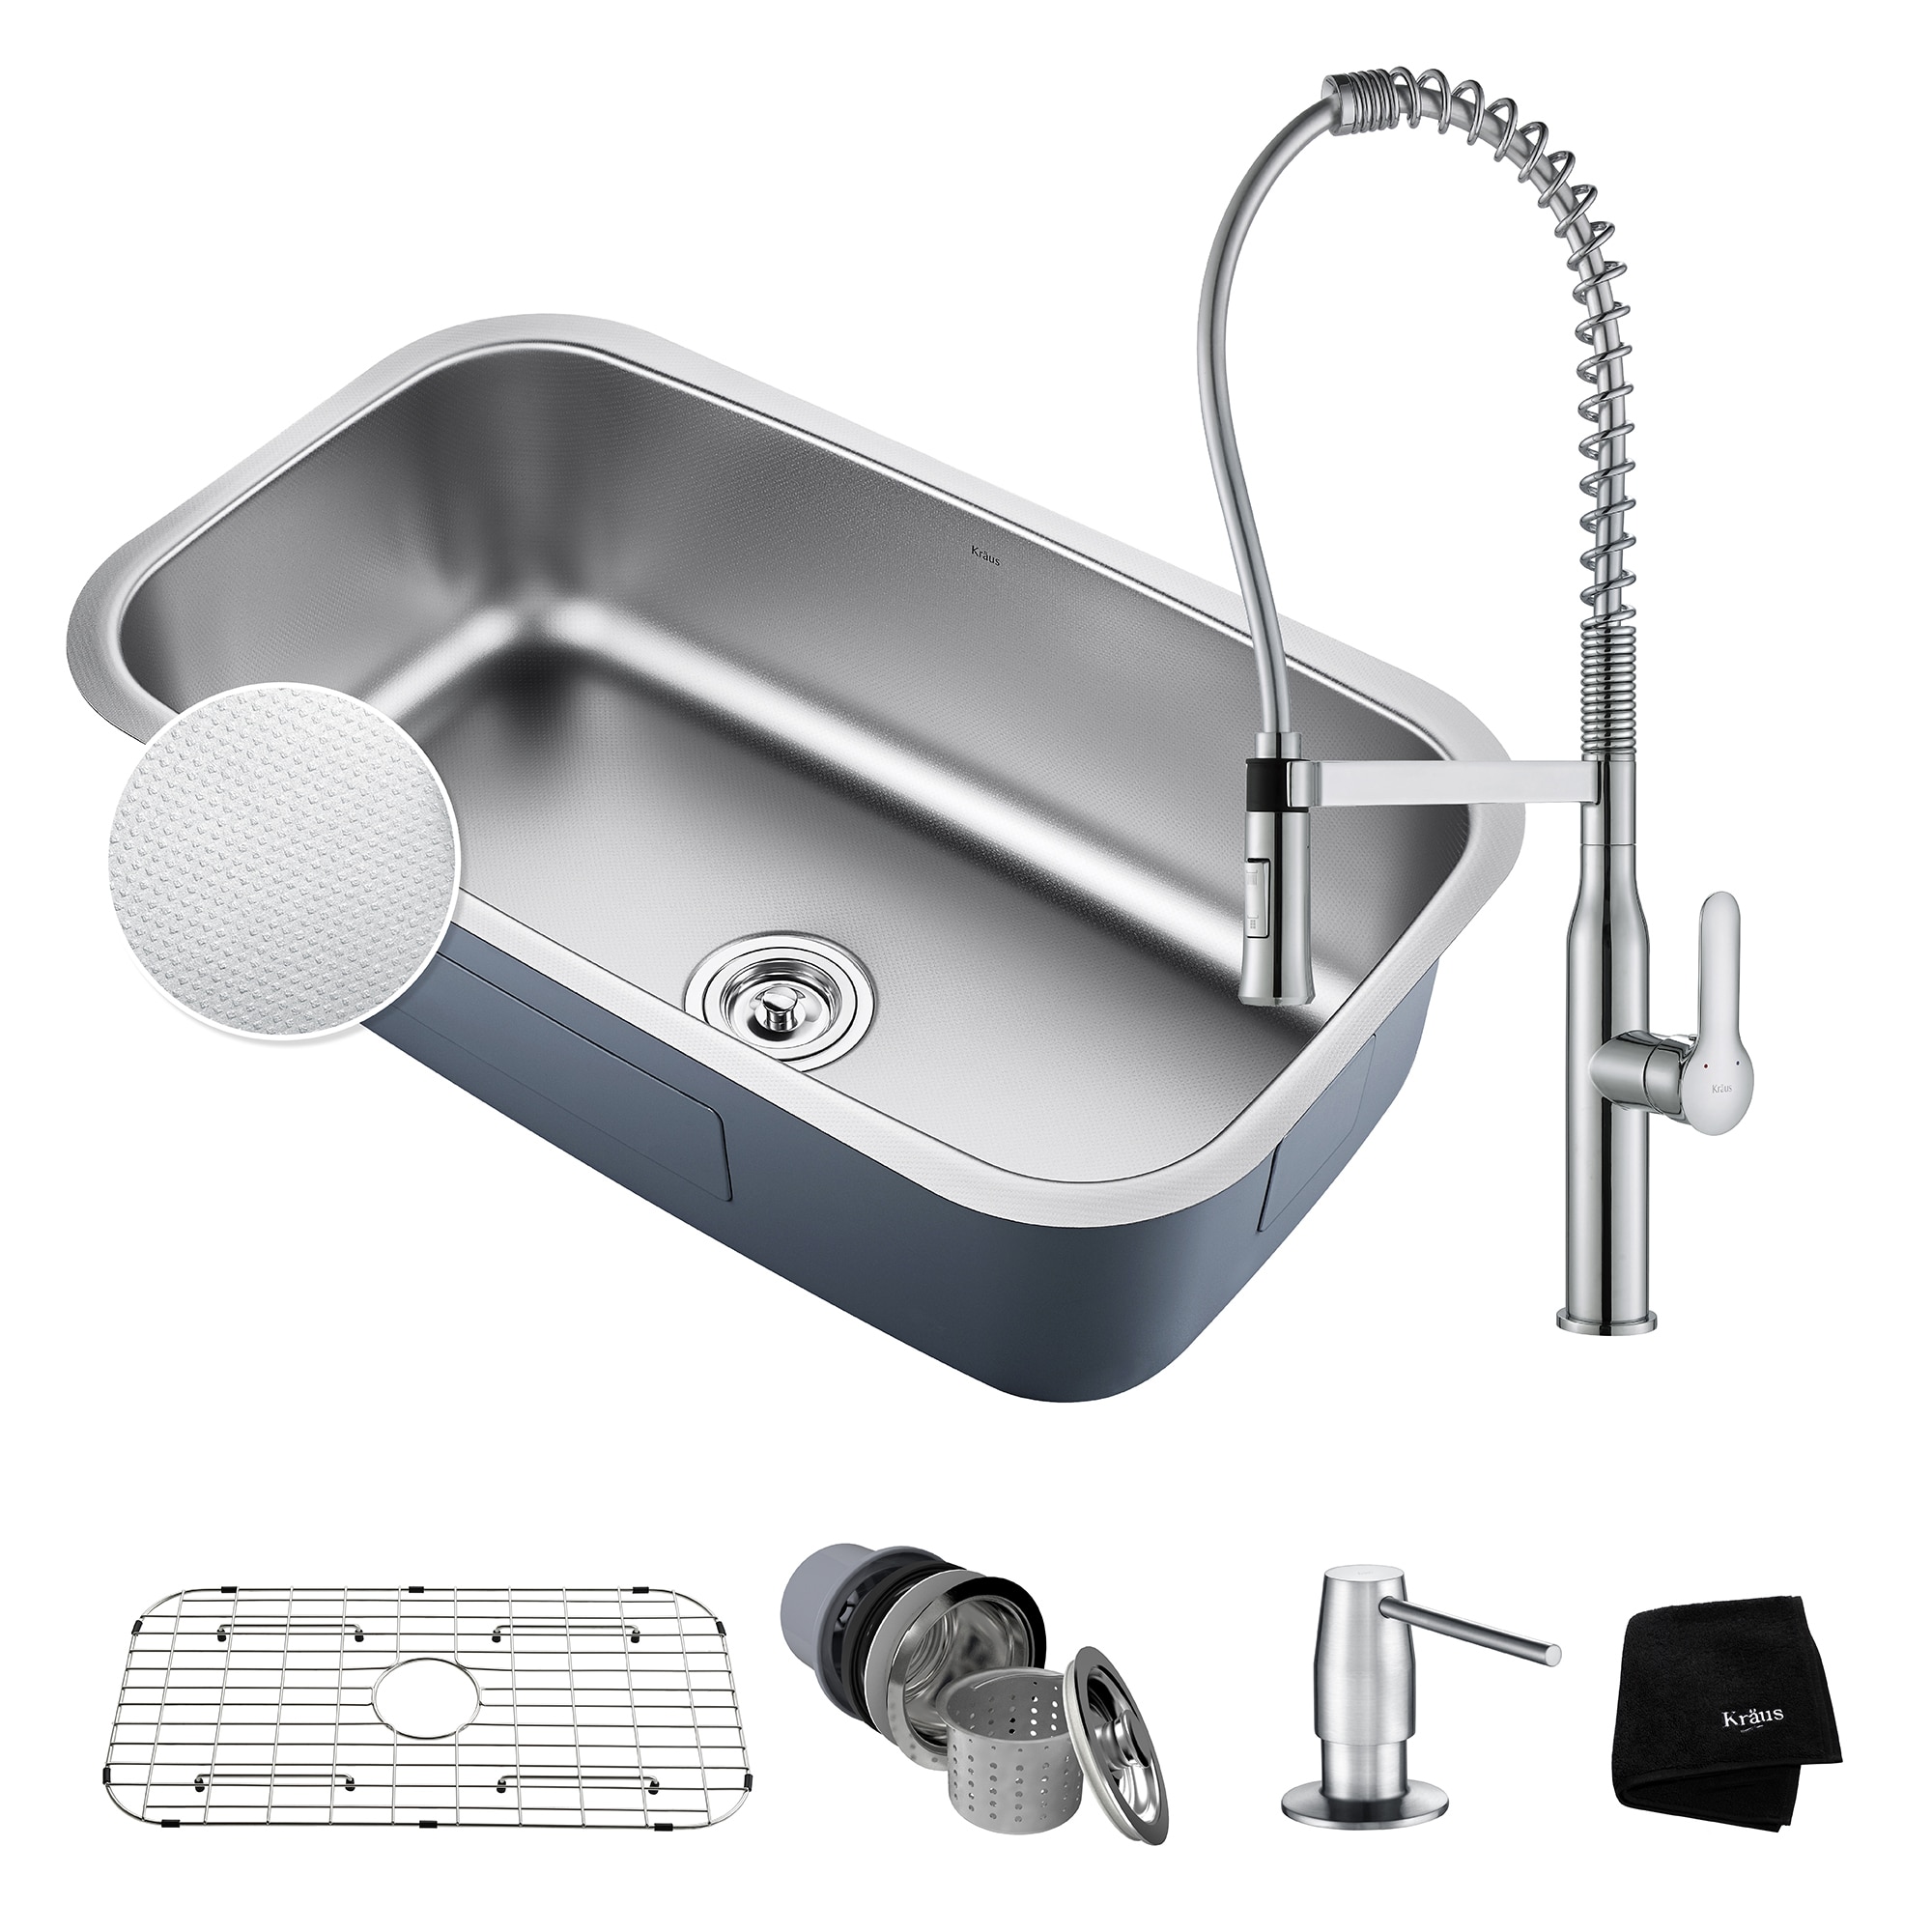 Kraus 31 1 2 In Undermount Single Bowl Stainless Steel Kitchen Sink Kpf 1640 Nola Commercial Pull Down Faucet Dispenser